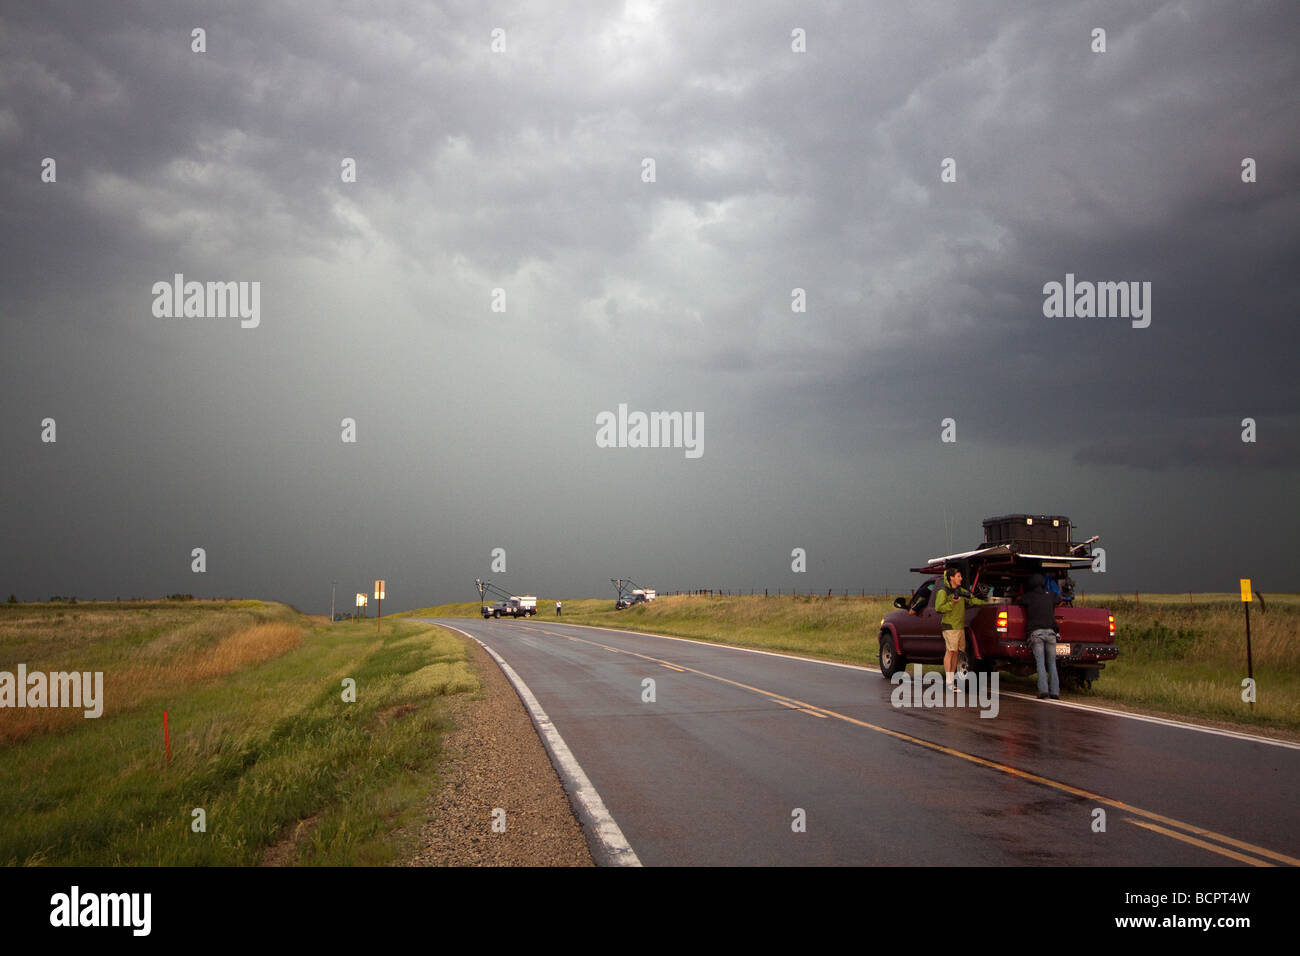 Sean Casey s IMAX secondary filming unit parked alongside the road in a fizzled storm during Project Vortex 2 June 1 2009 Stock Photo